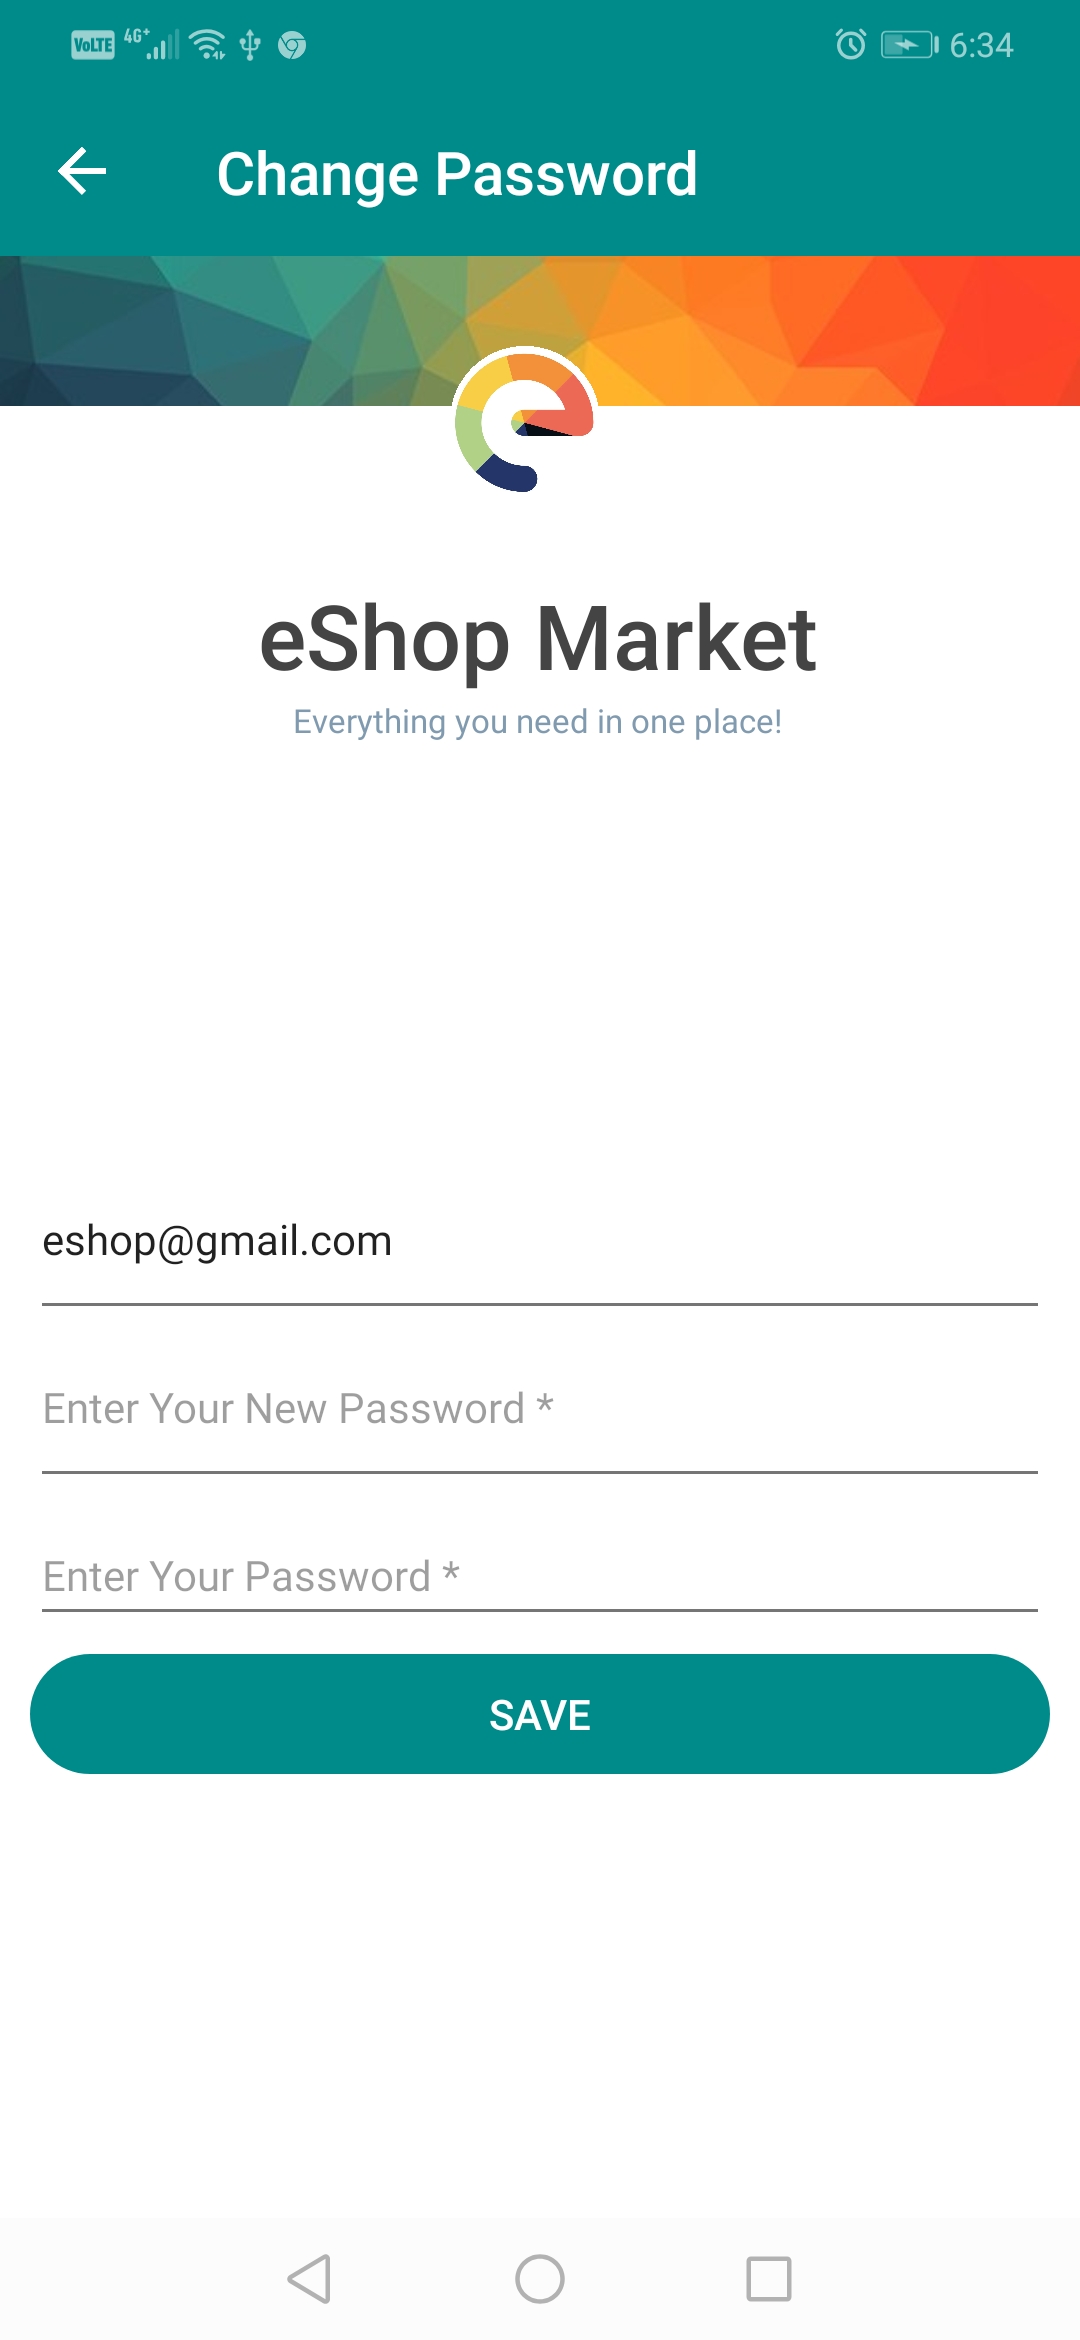 eShop Mobile App, Restful API and Admin Site Using Xamarin Forms and MVC - Full Source Code - 8